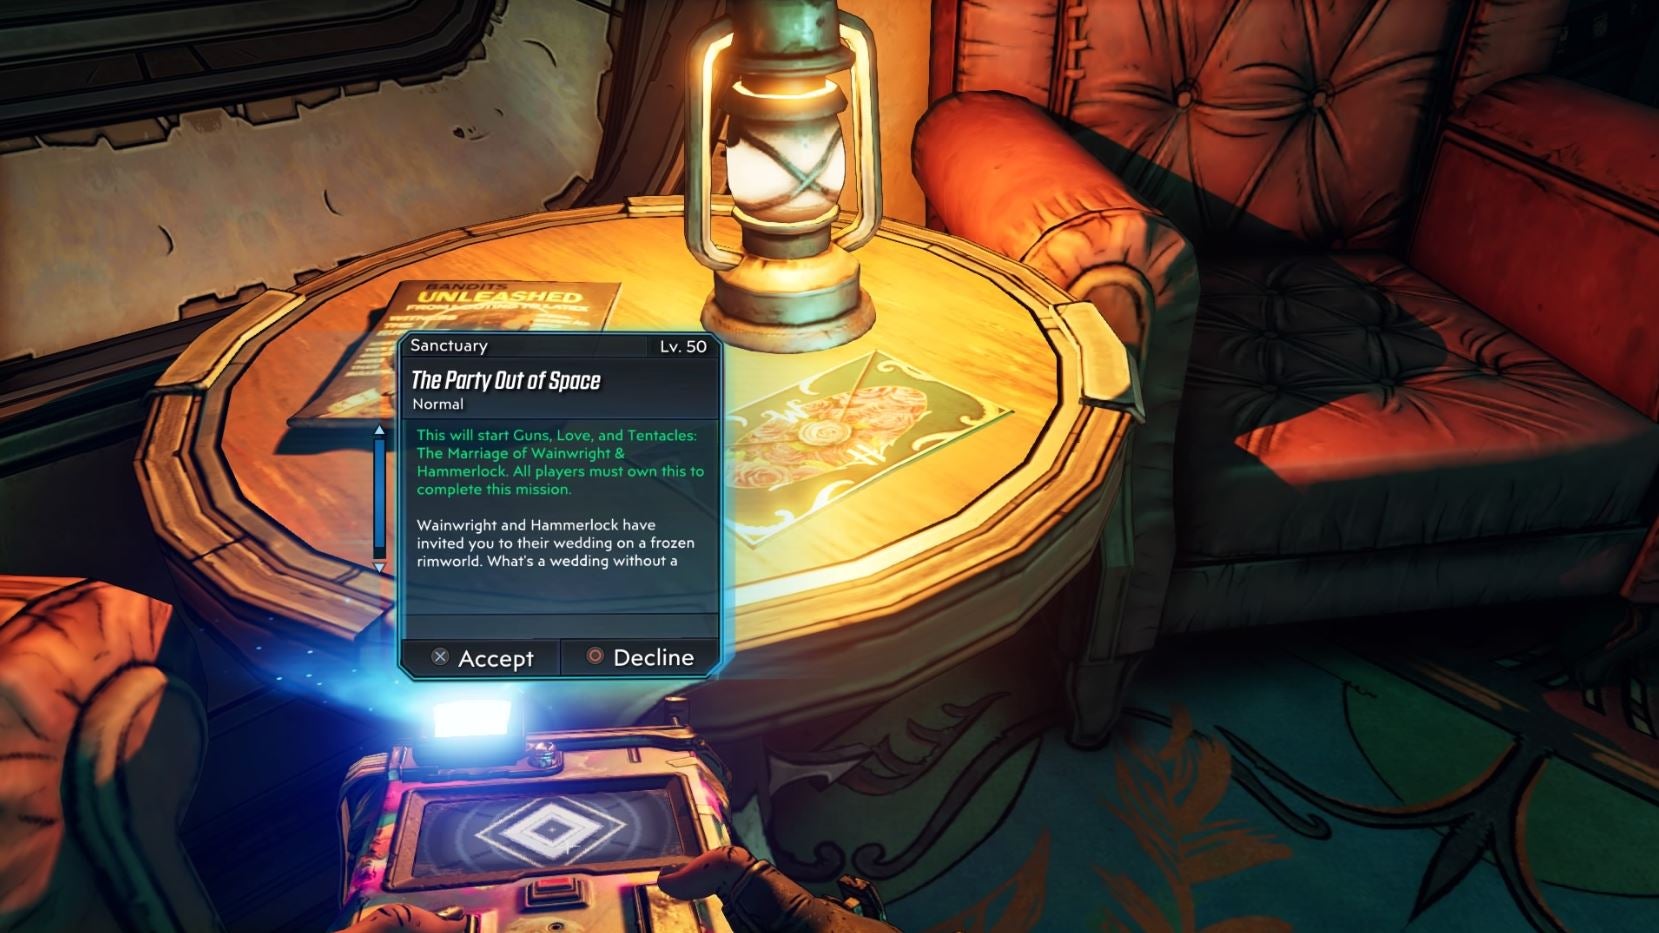 How to start the new Borderlands 3: Guns, Love and Tentacles DLC release times across all regions | VG247